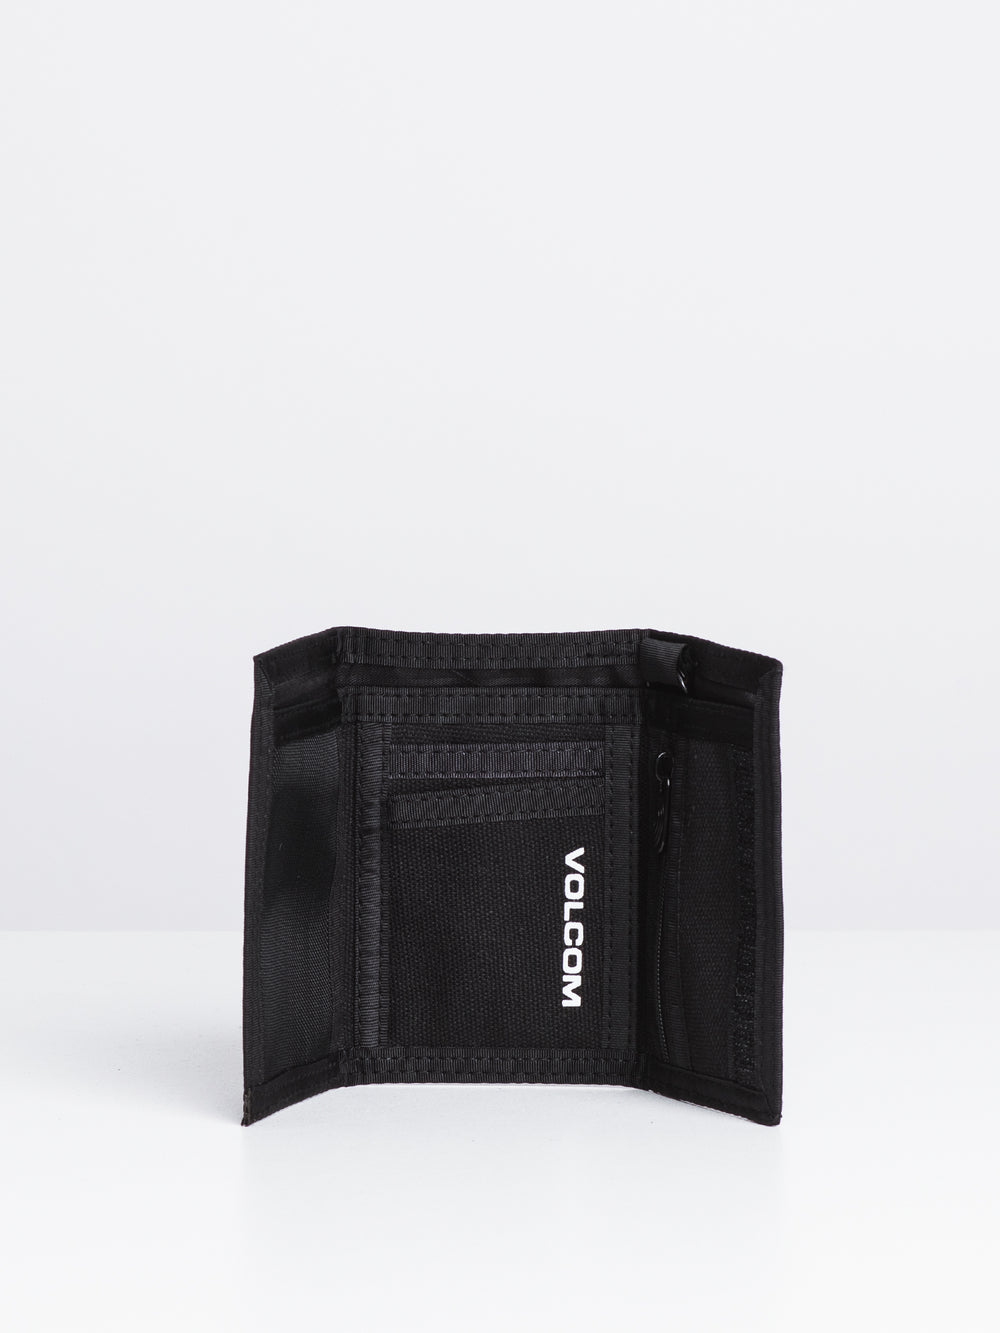 BOX STONE WALLET - BLACK - CLEARANCE